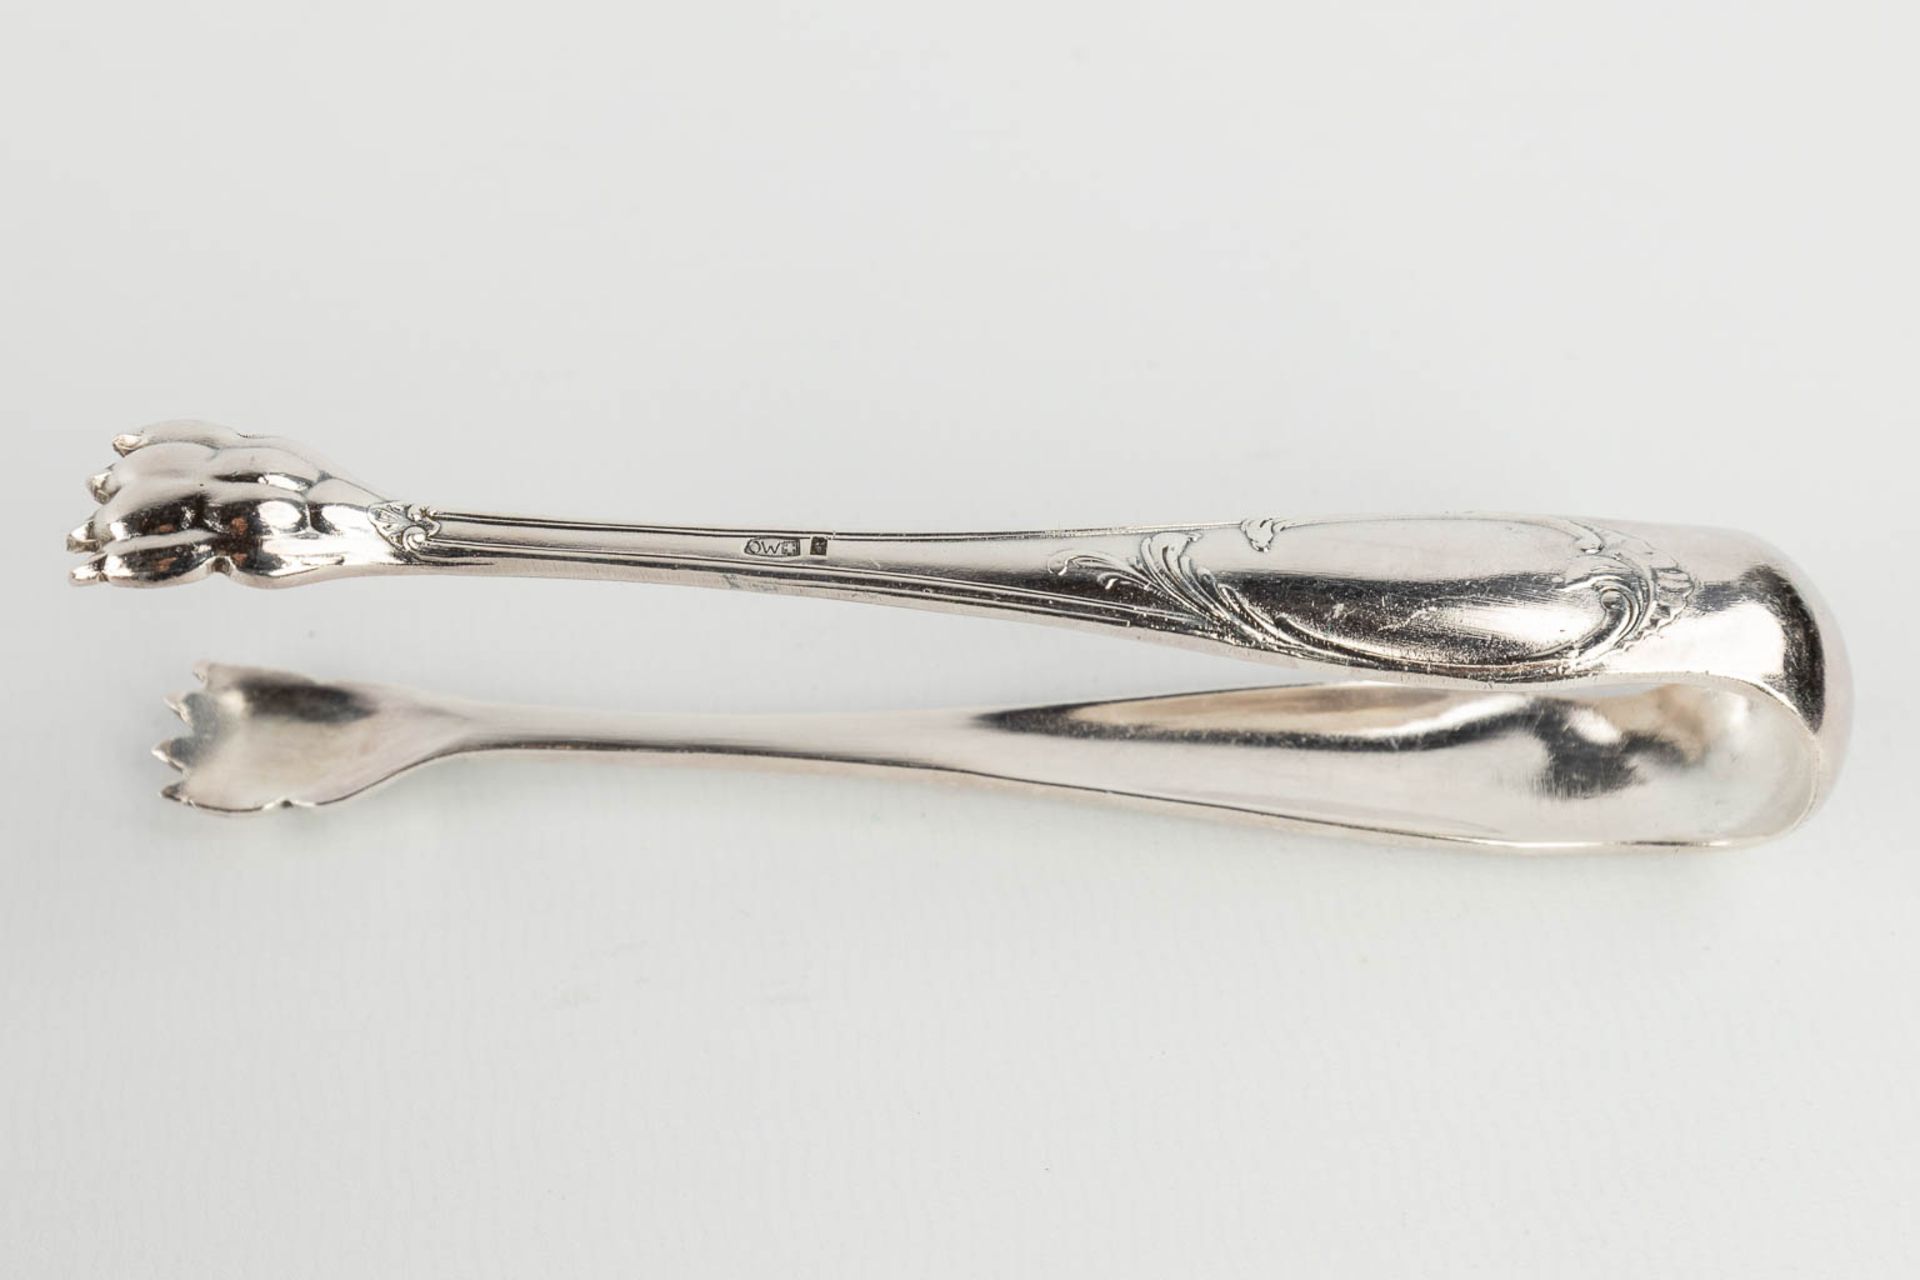 B. Wiskemann, Bruxelles, a silver-plated cutlery set, Louis XV style. (L: 30 x W: 39 x H: 22 cm) - Image 22 of 24